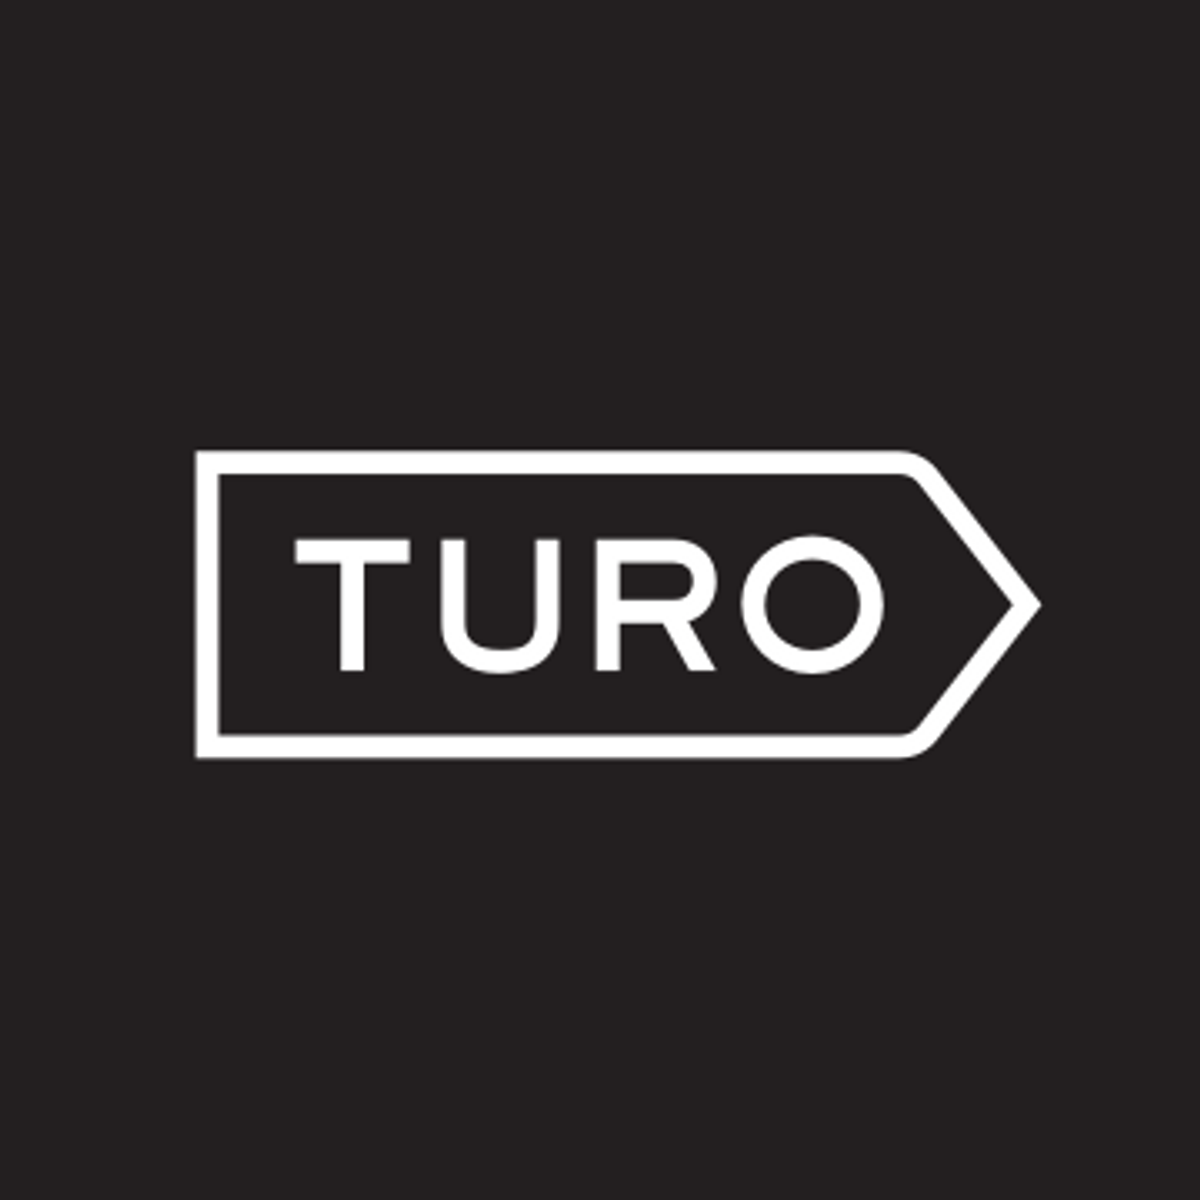 Get a behind-the-scenes look into how Turo builds its products